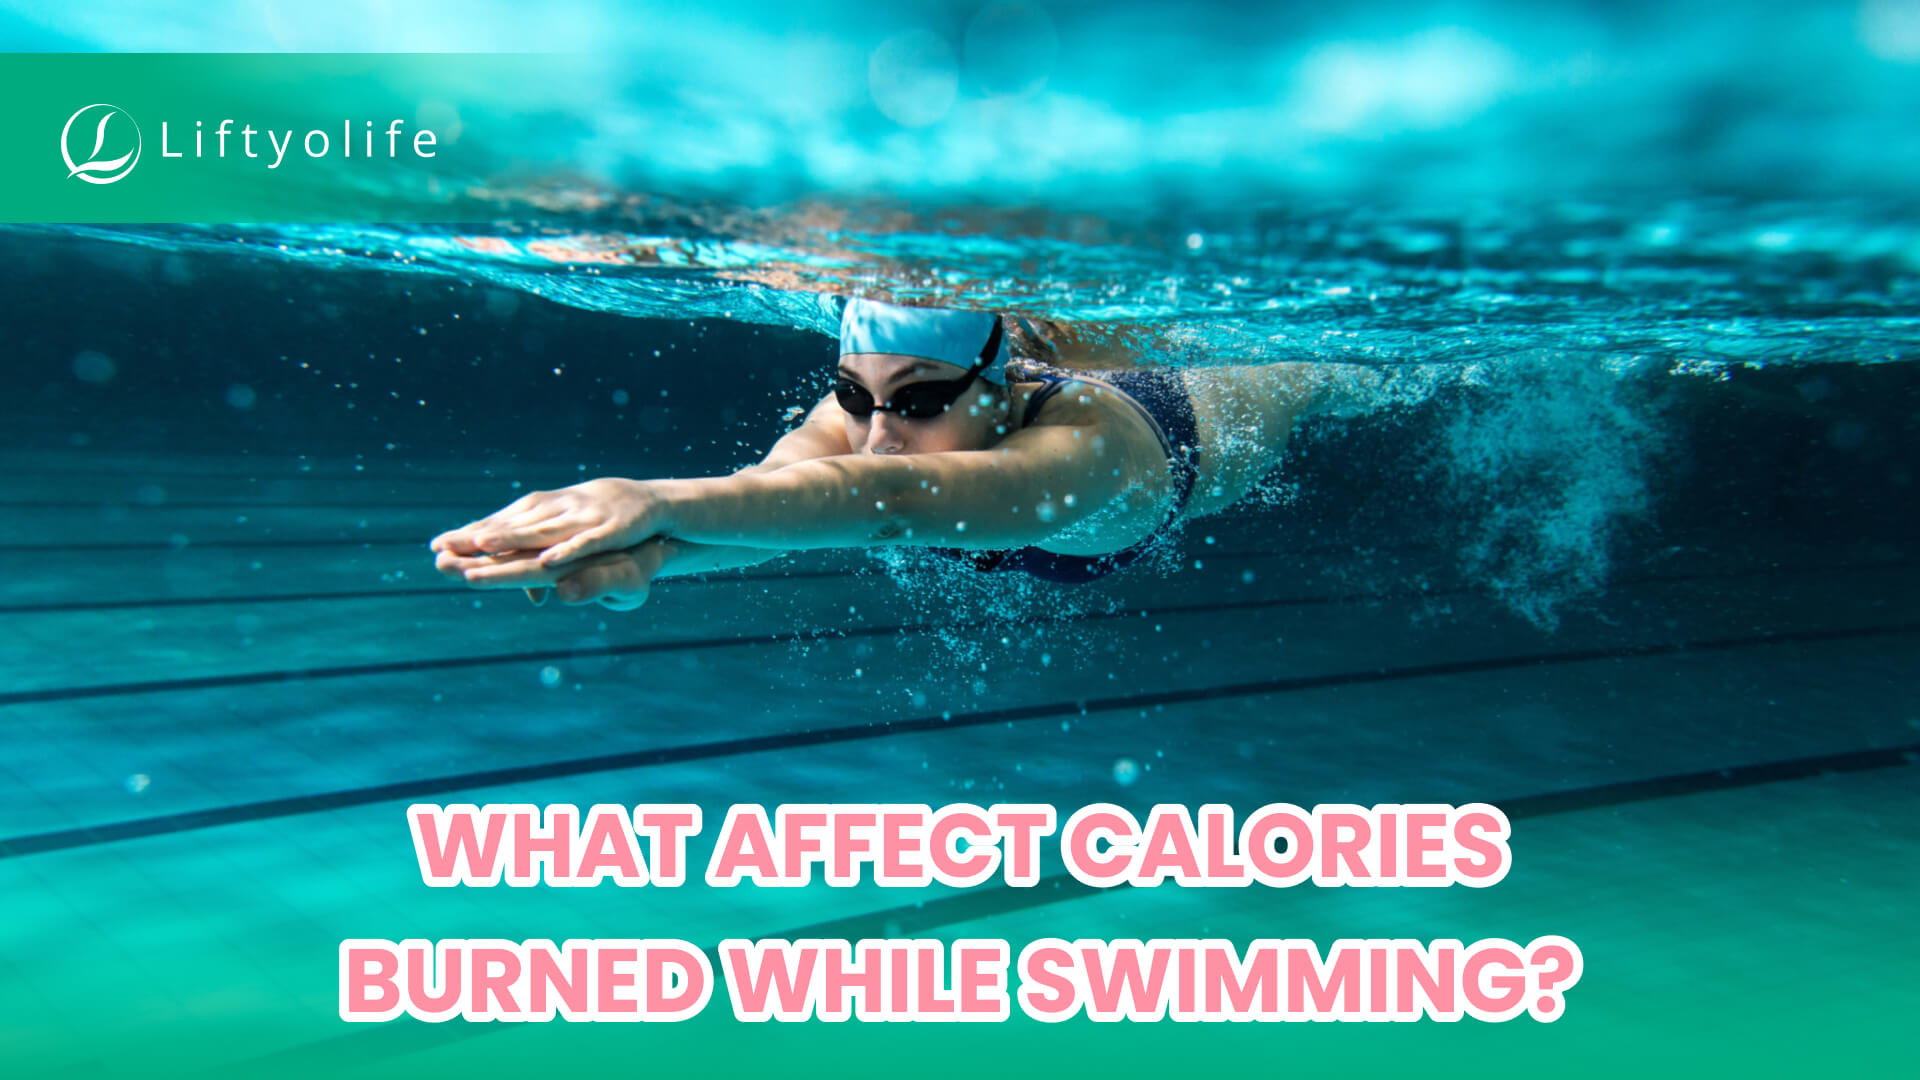 What Factors Into Your Calories Burned While Swimming?